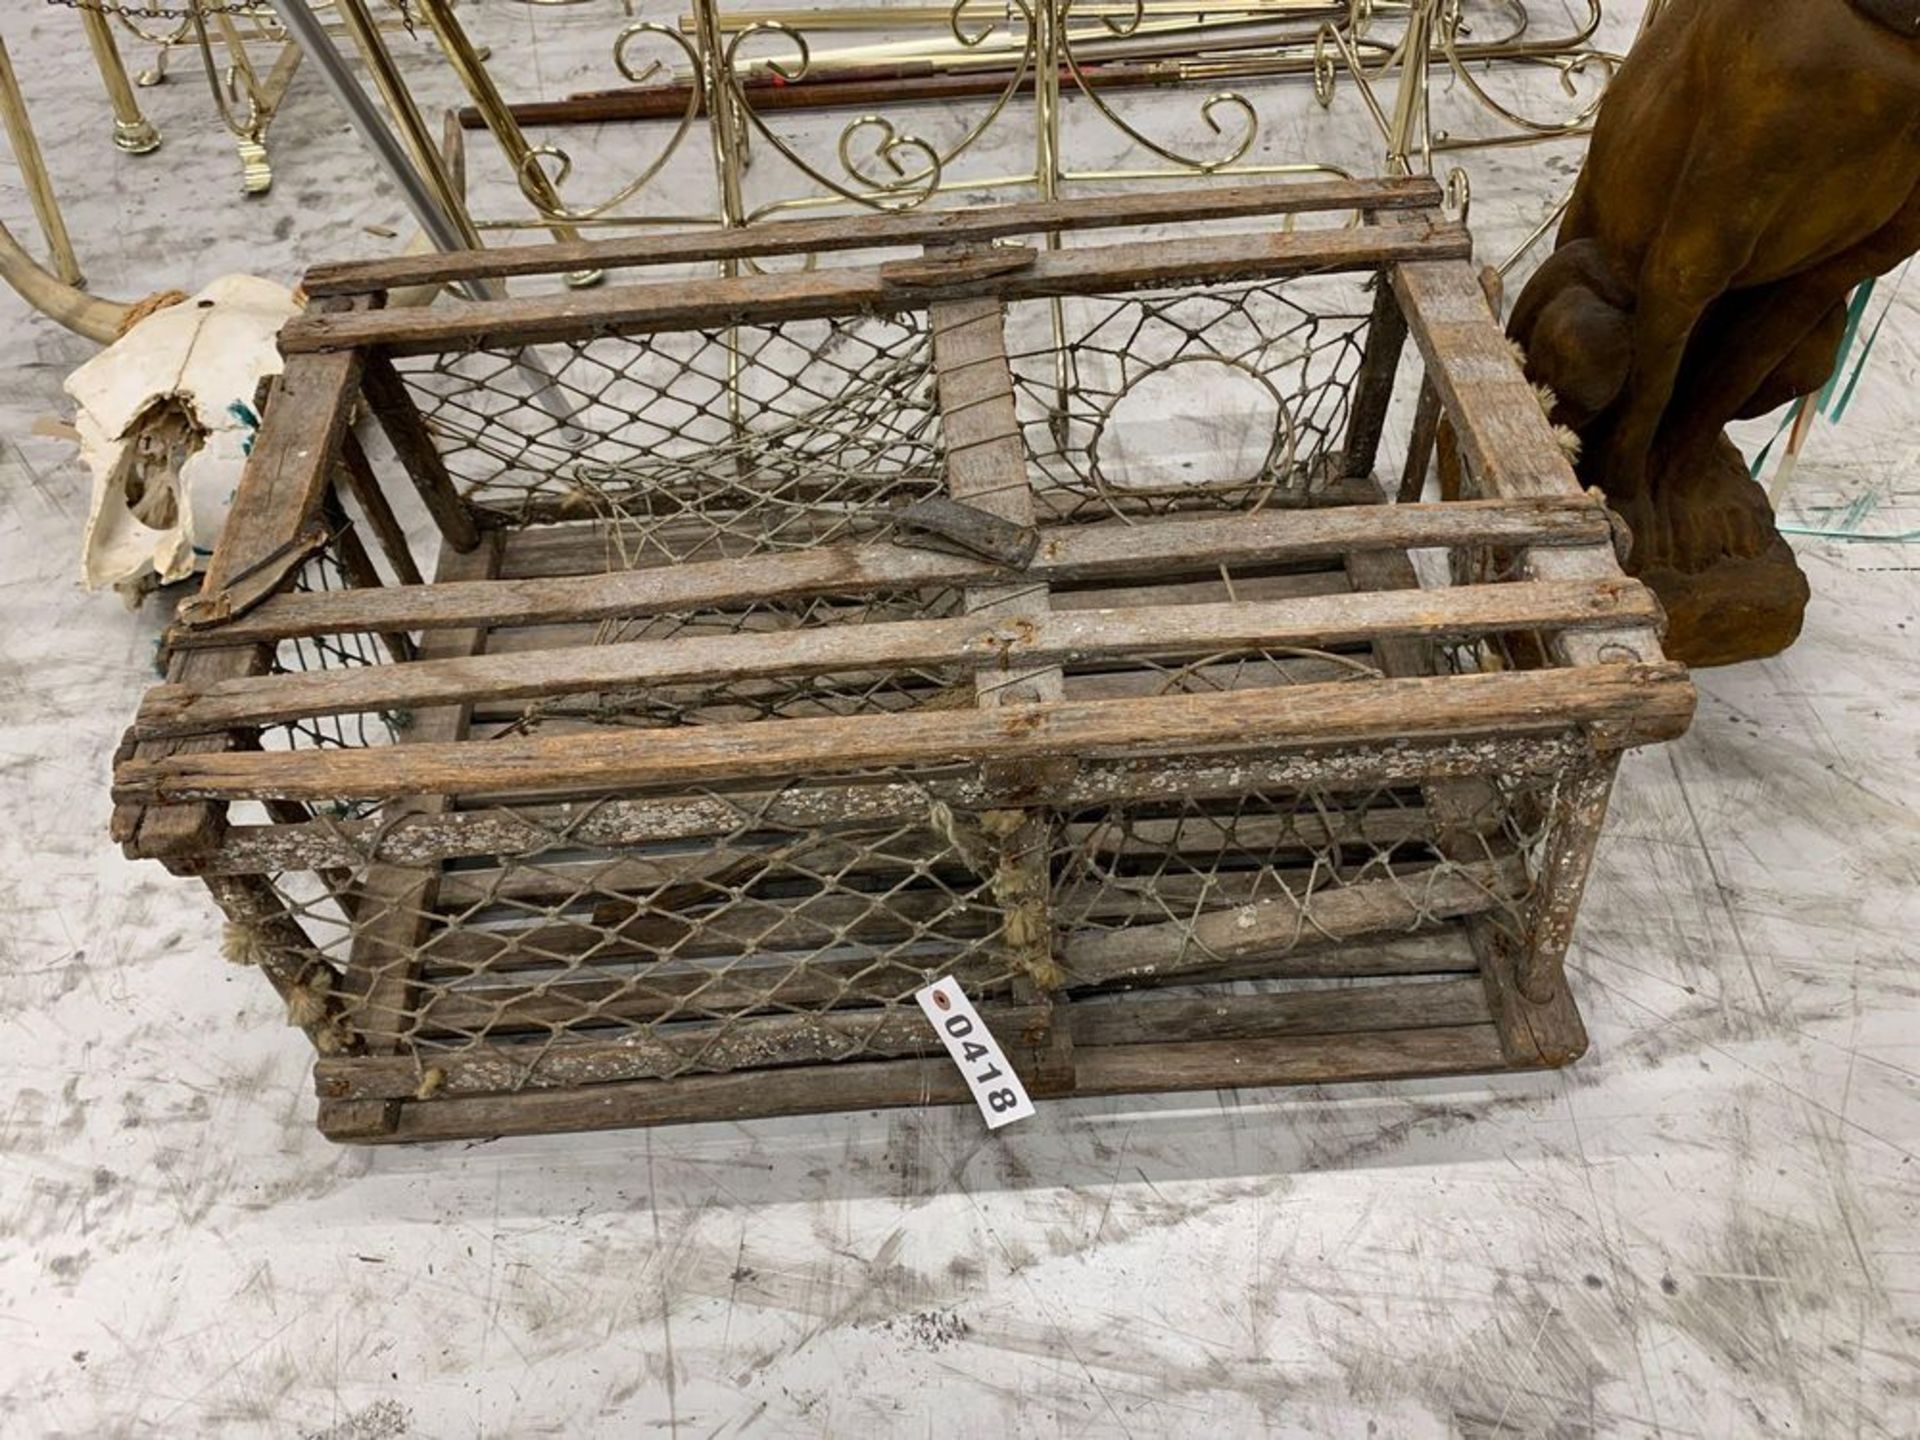 Lobster Trap - Image 3 of 3